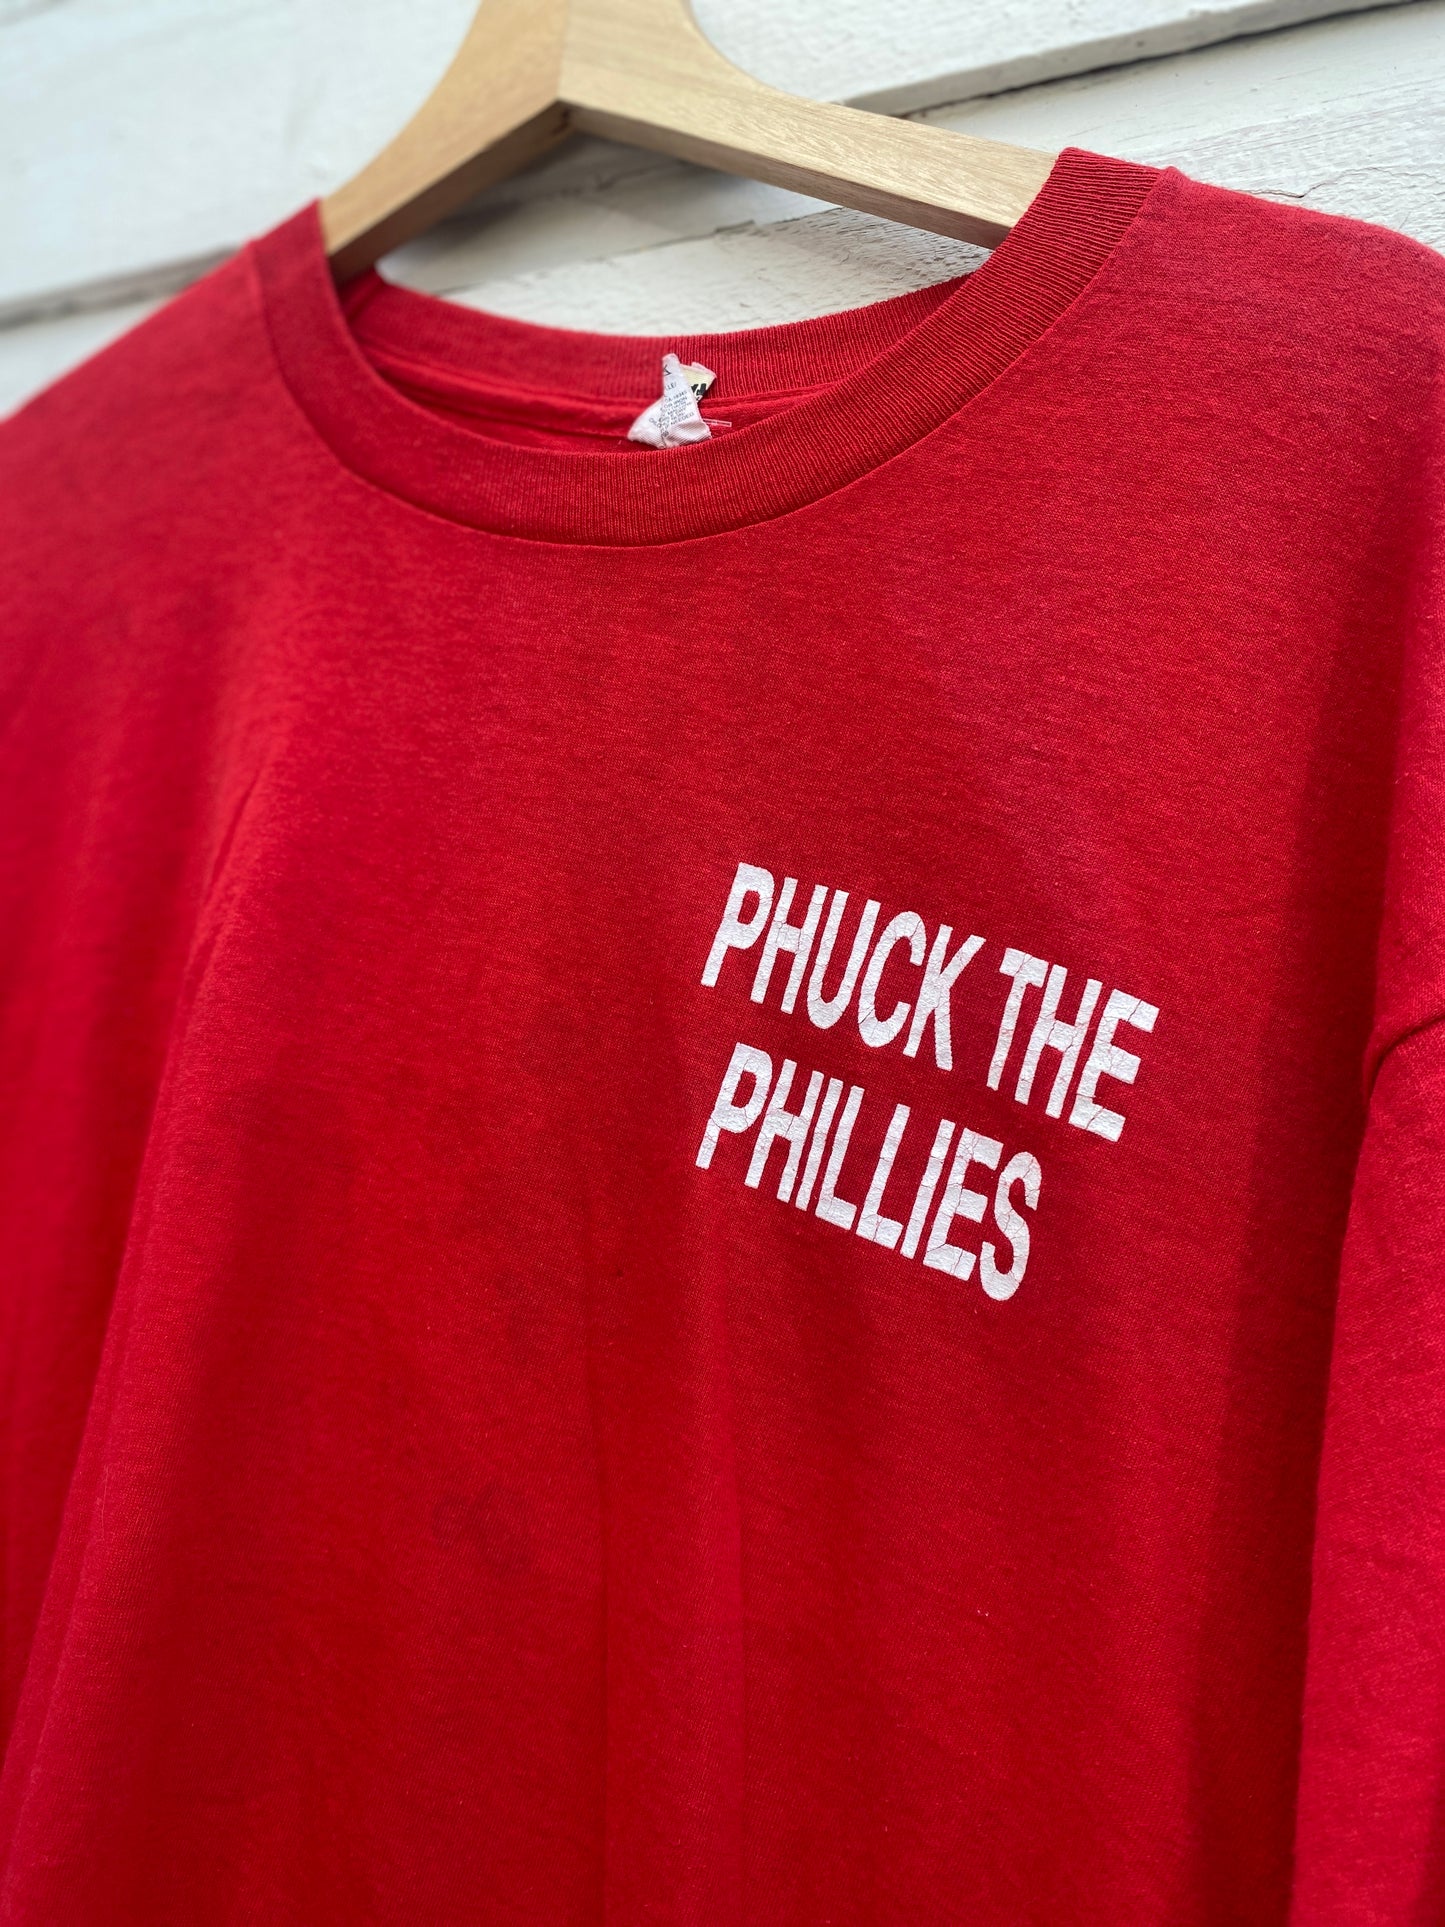 Vintage Phuck The Phillies Tshirt Cropped Boxy Large